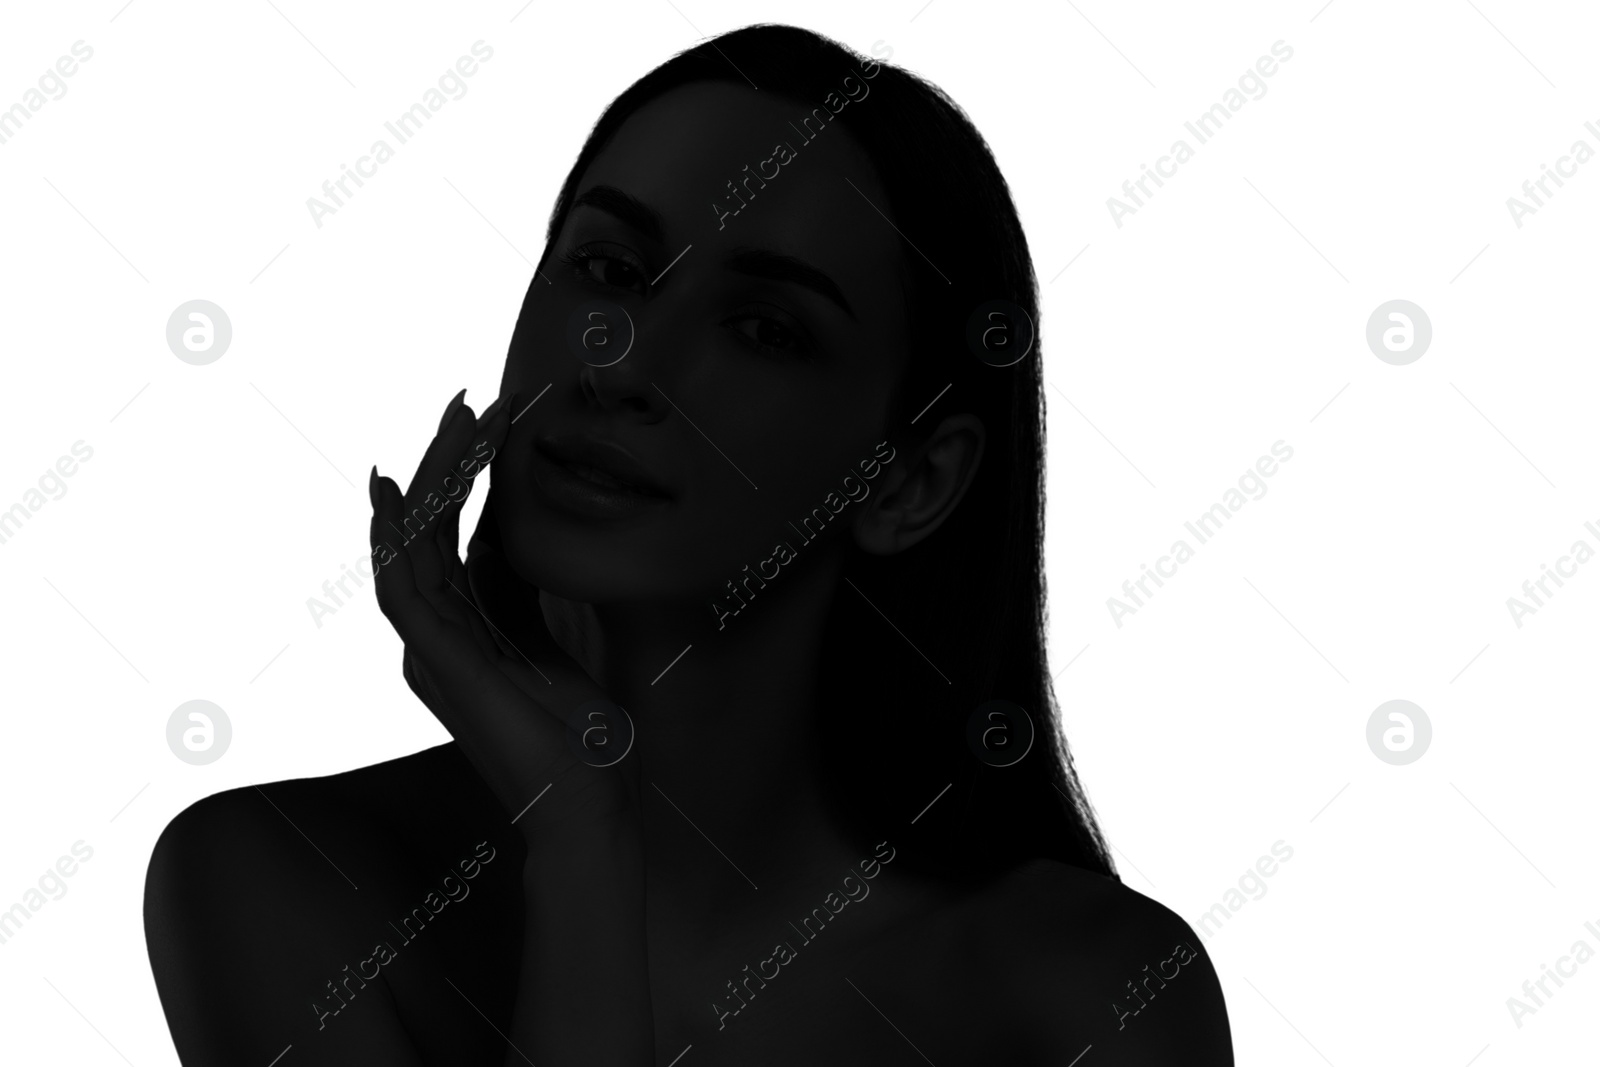 Image of Silhouette of one woman isolated on white